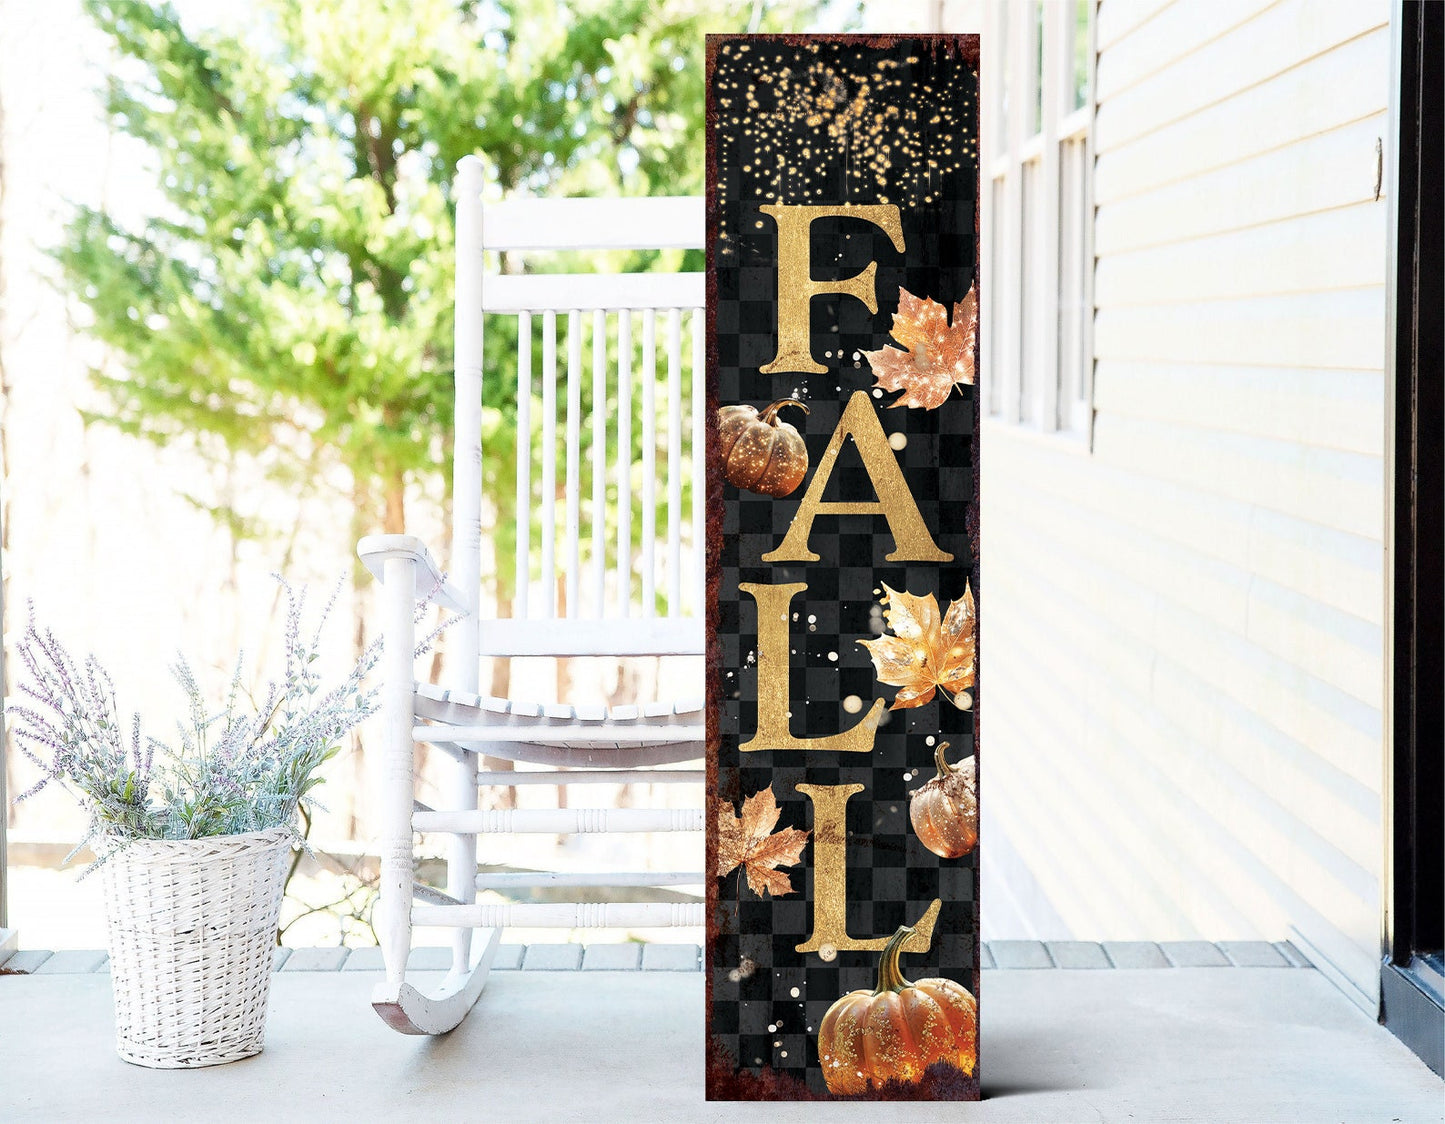 36-inch Fall Porch Sign - Front Porch Fall Welcome Sign with Vintage Autumn Decoration, Rustic Modern Farmhouse Entryway Porch Decor